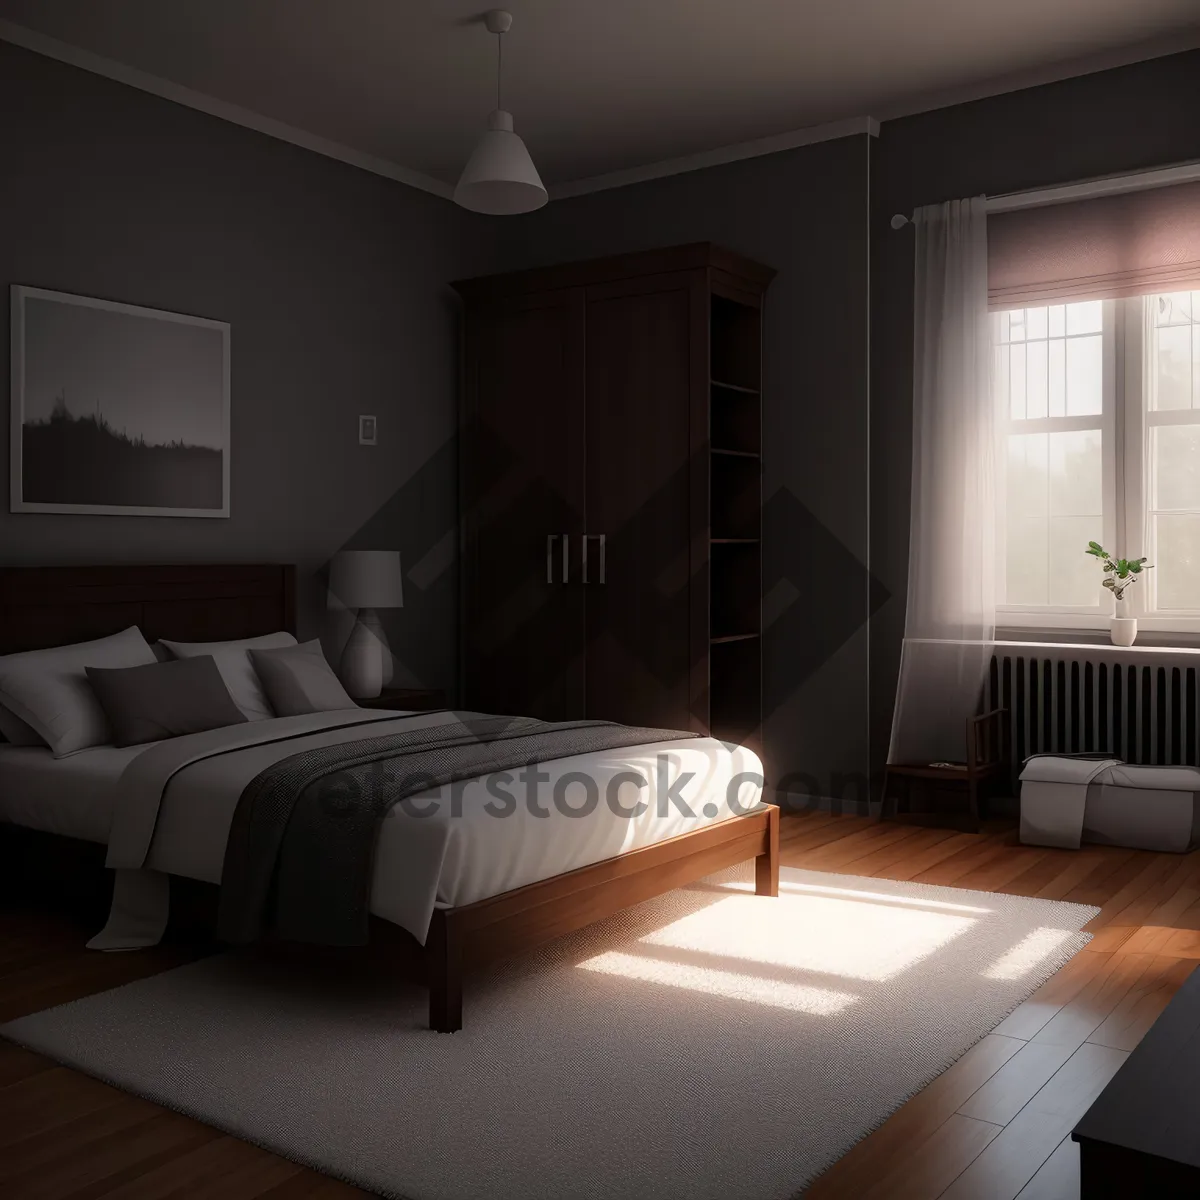 Picture of Modern Comfort: Stylish Bedroom Interior with Cozy Furniture